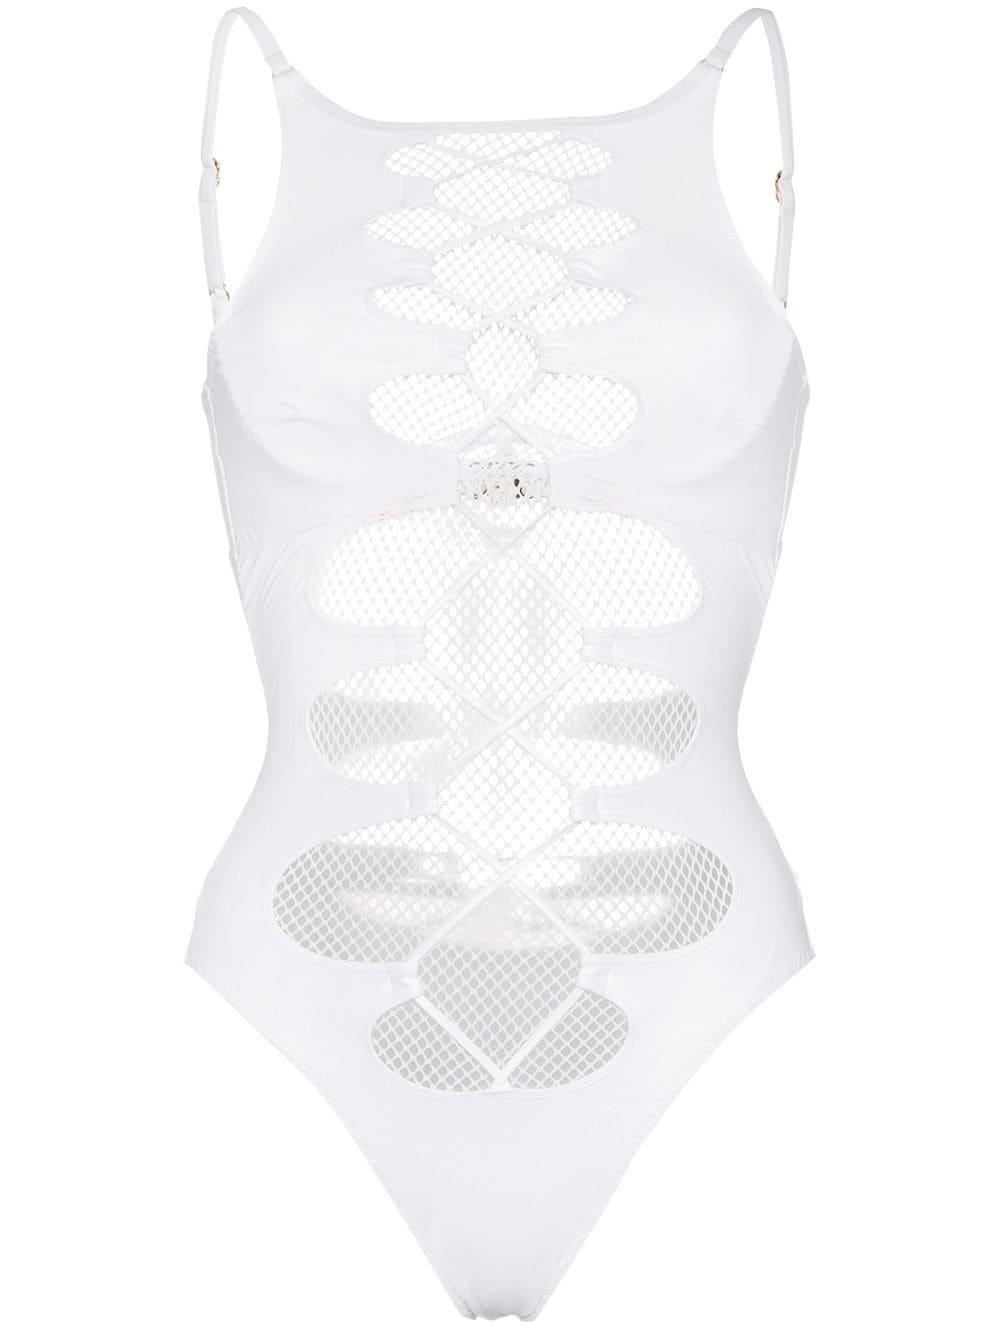 Agent Provocateur Synthetic Hatty Mesh Lace-up Swimsuit in White - Lyst